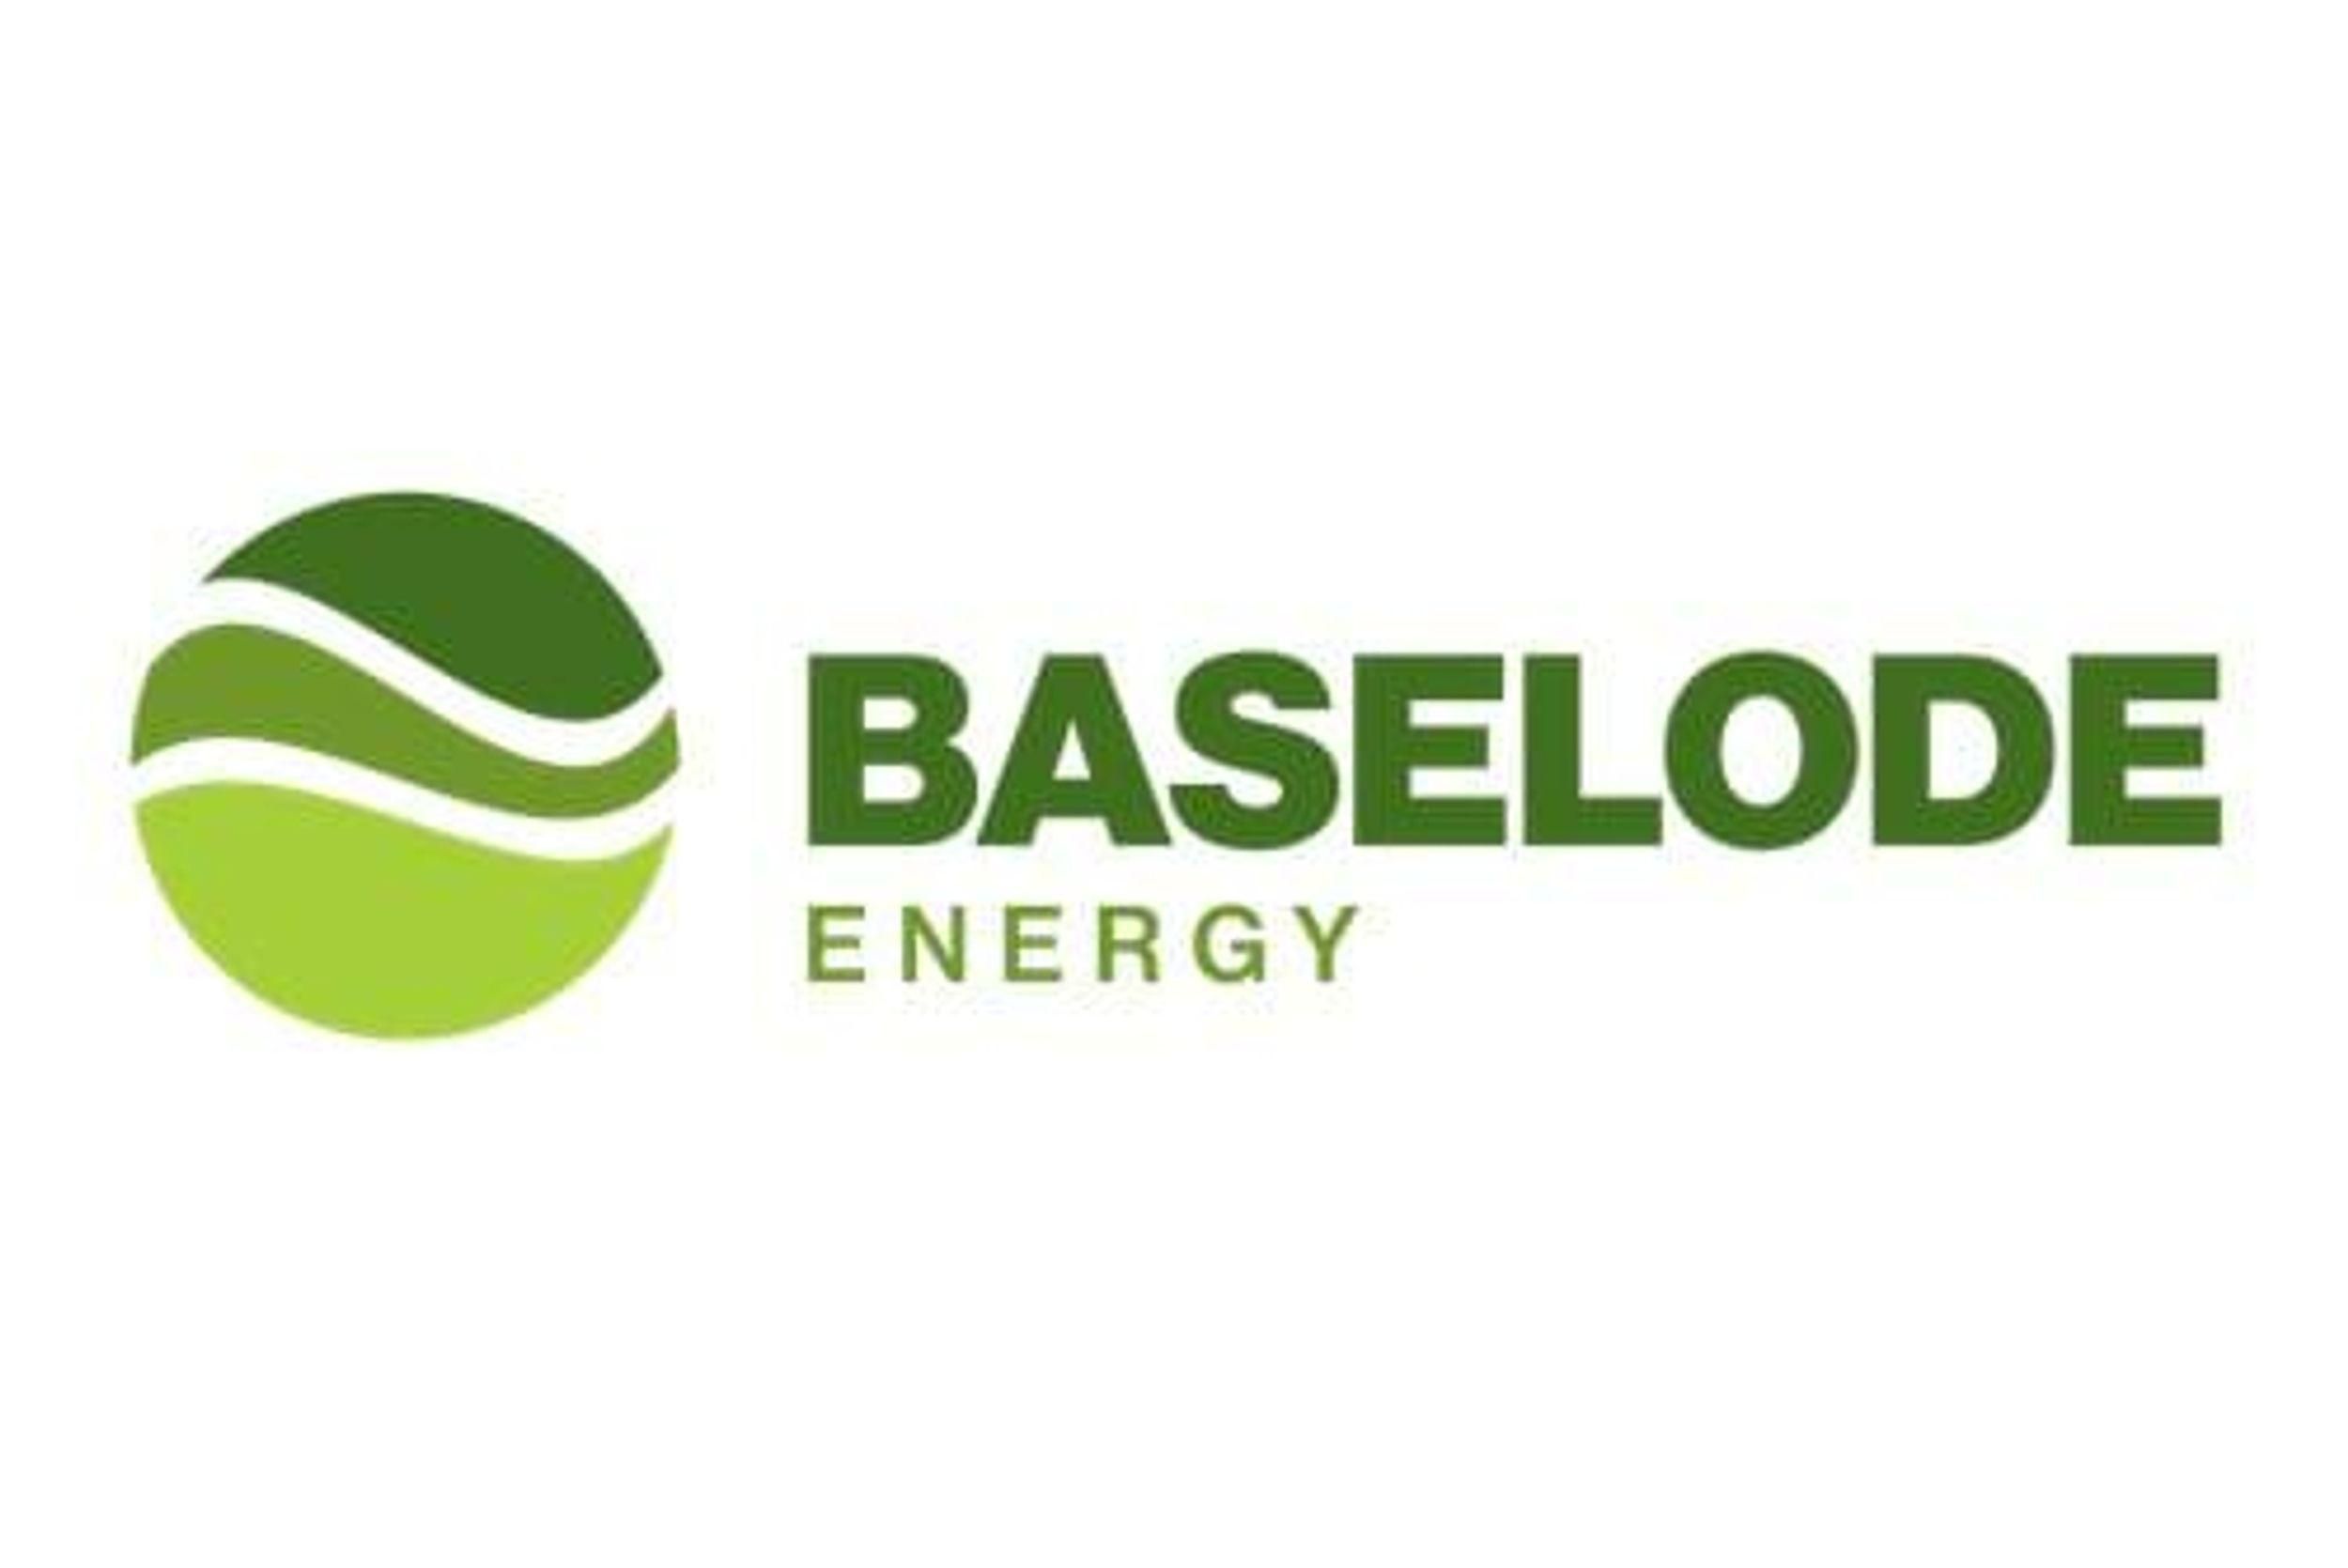 Baselode Extends ACKIO High-Grade Uranium Zone 100 m to the Southeast with Strongest Intersections of Elevated Radioactivity